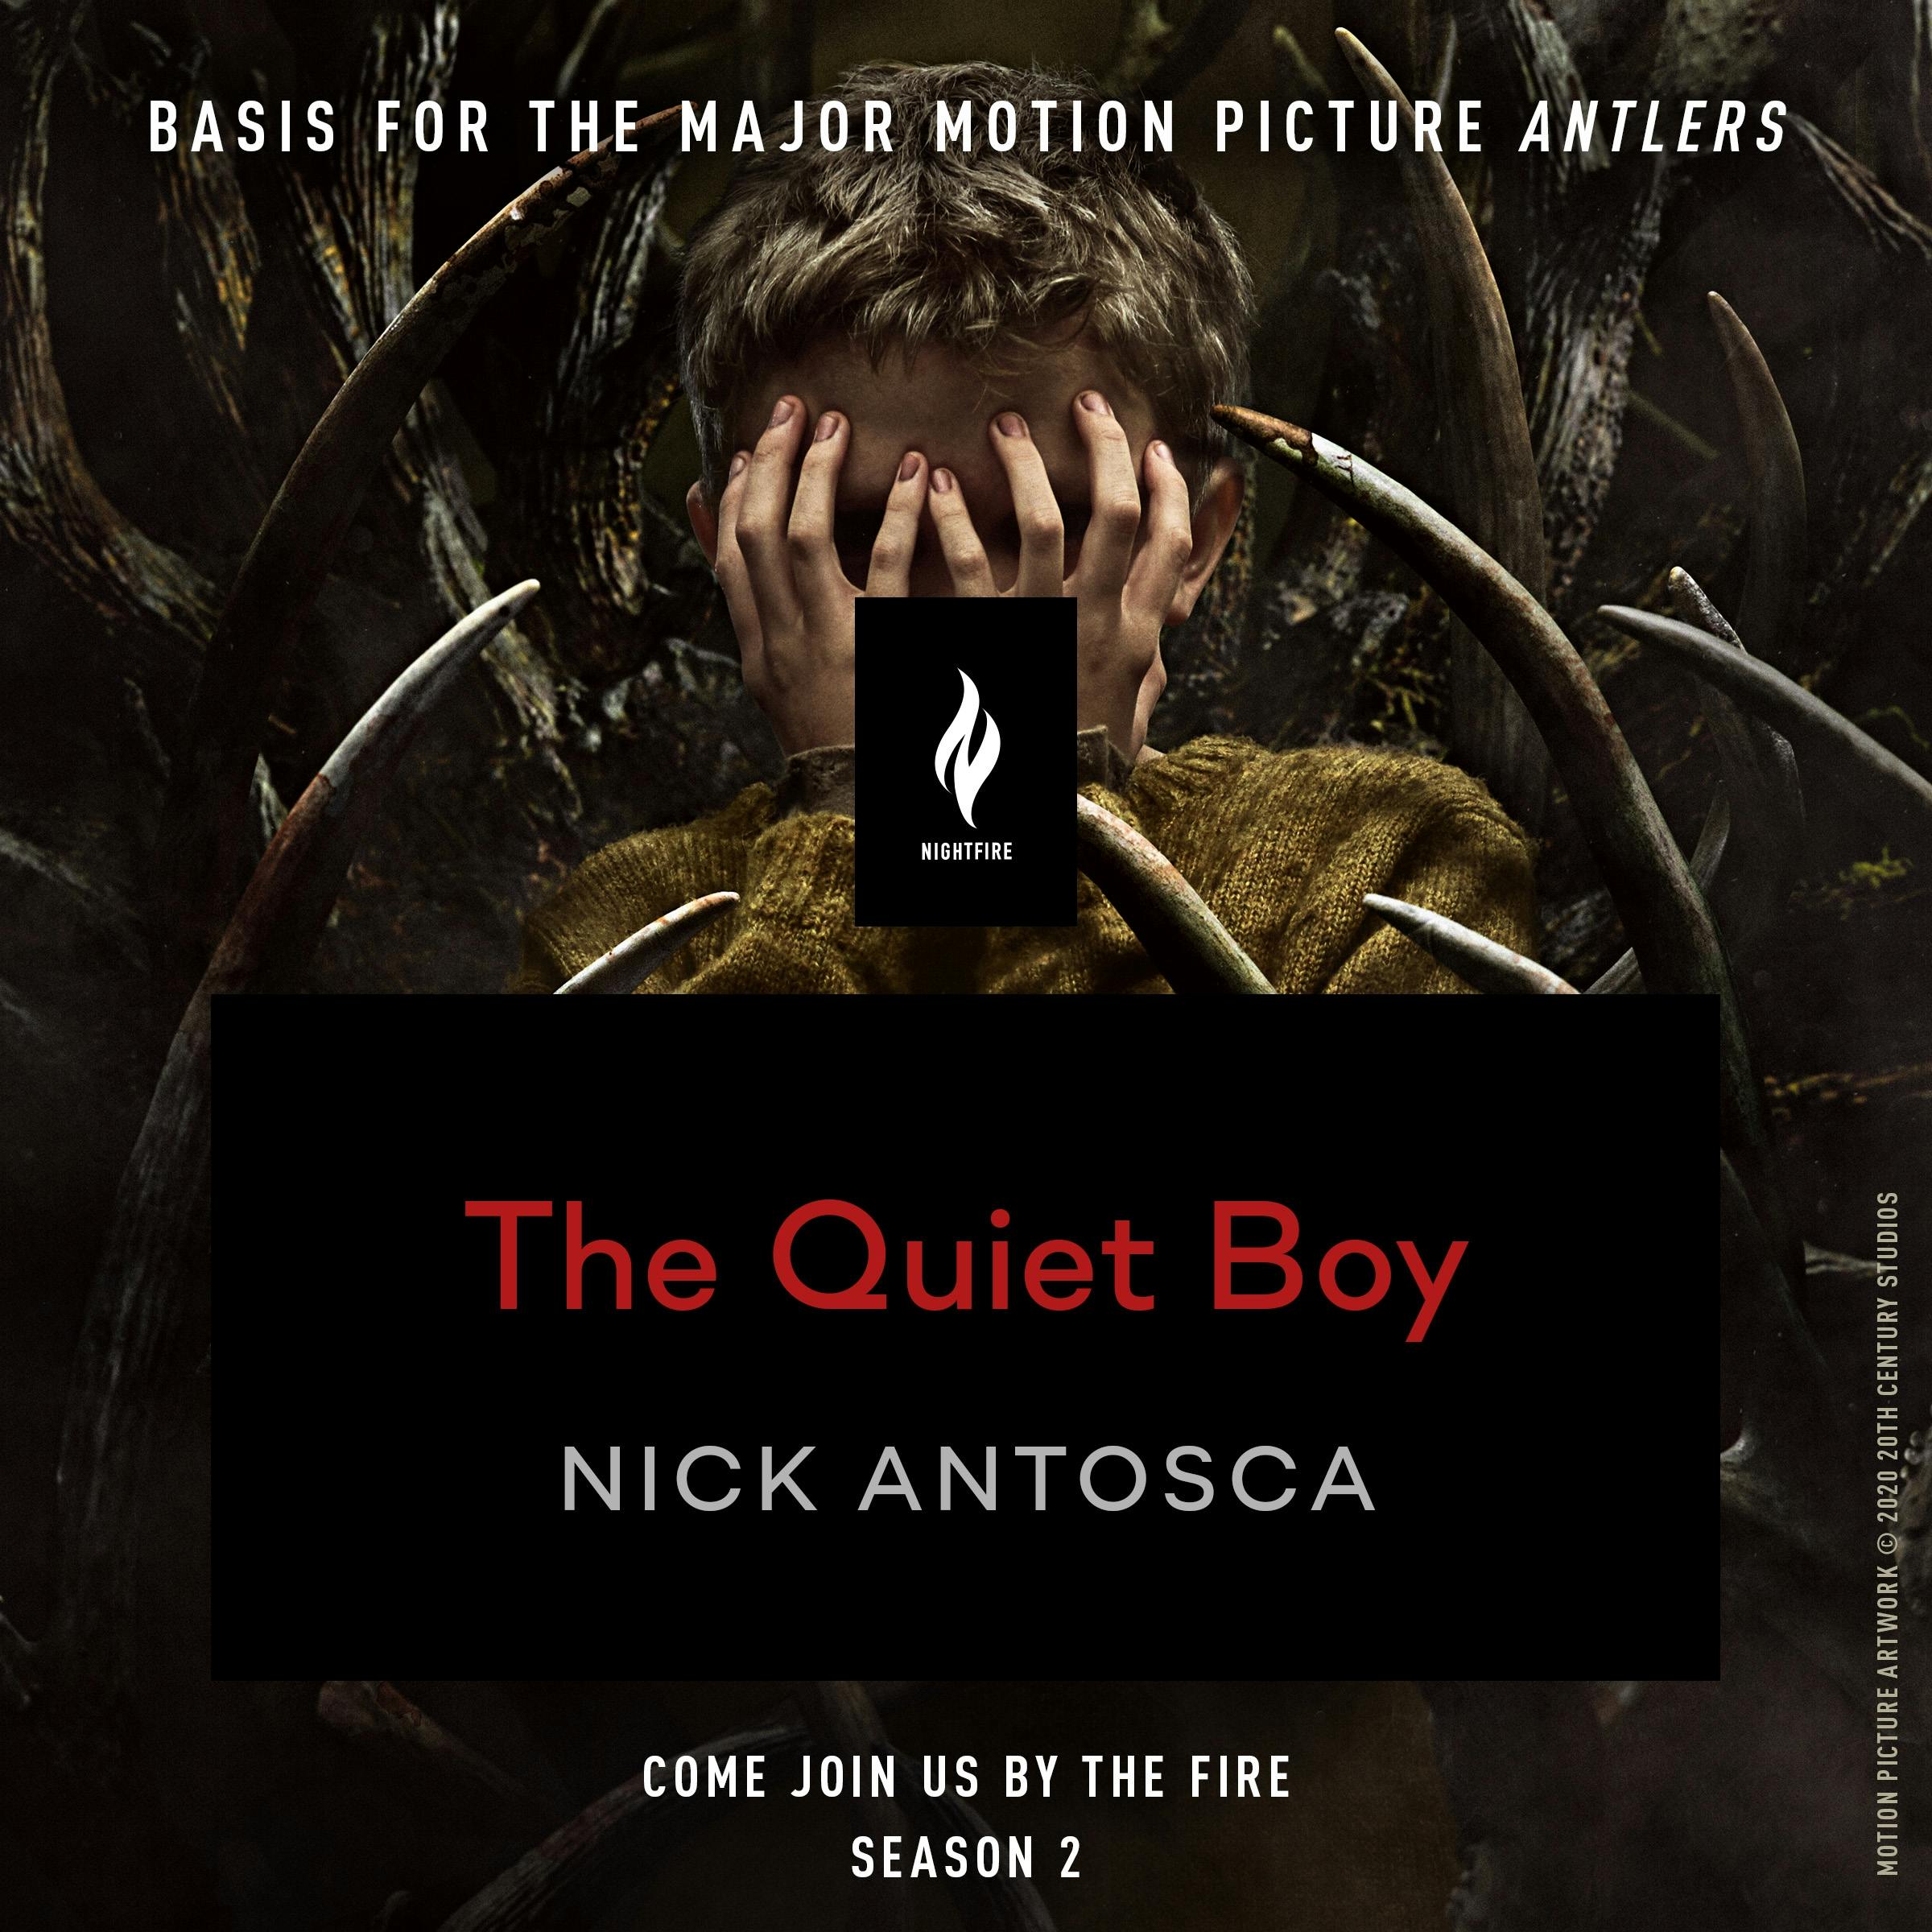 Cover for the book titled as: The Quiet Boy